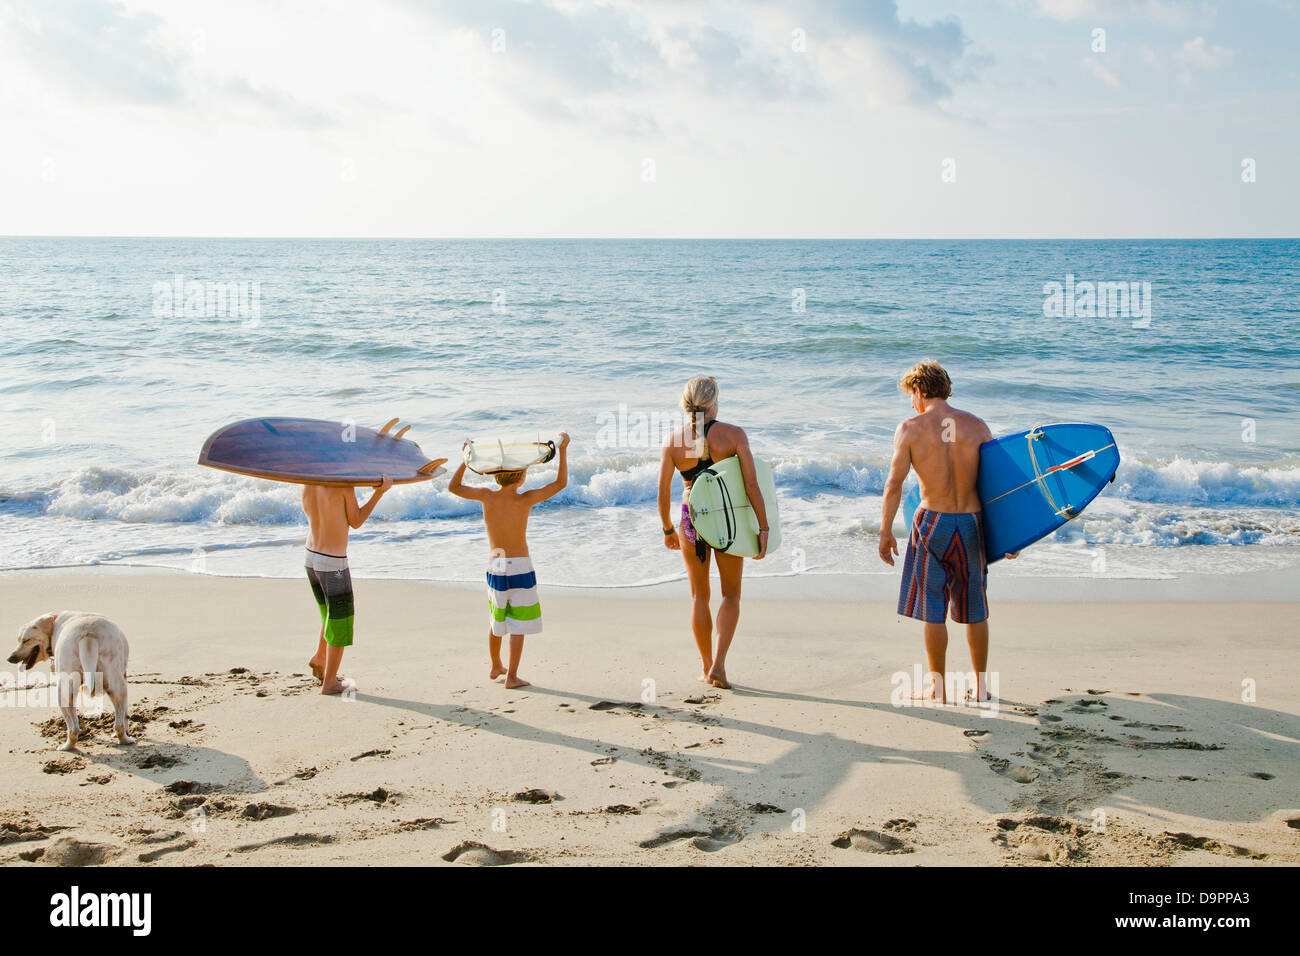 Family on beach holding surfboards Banque D'Images